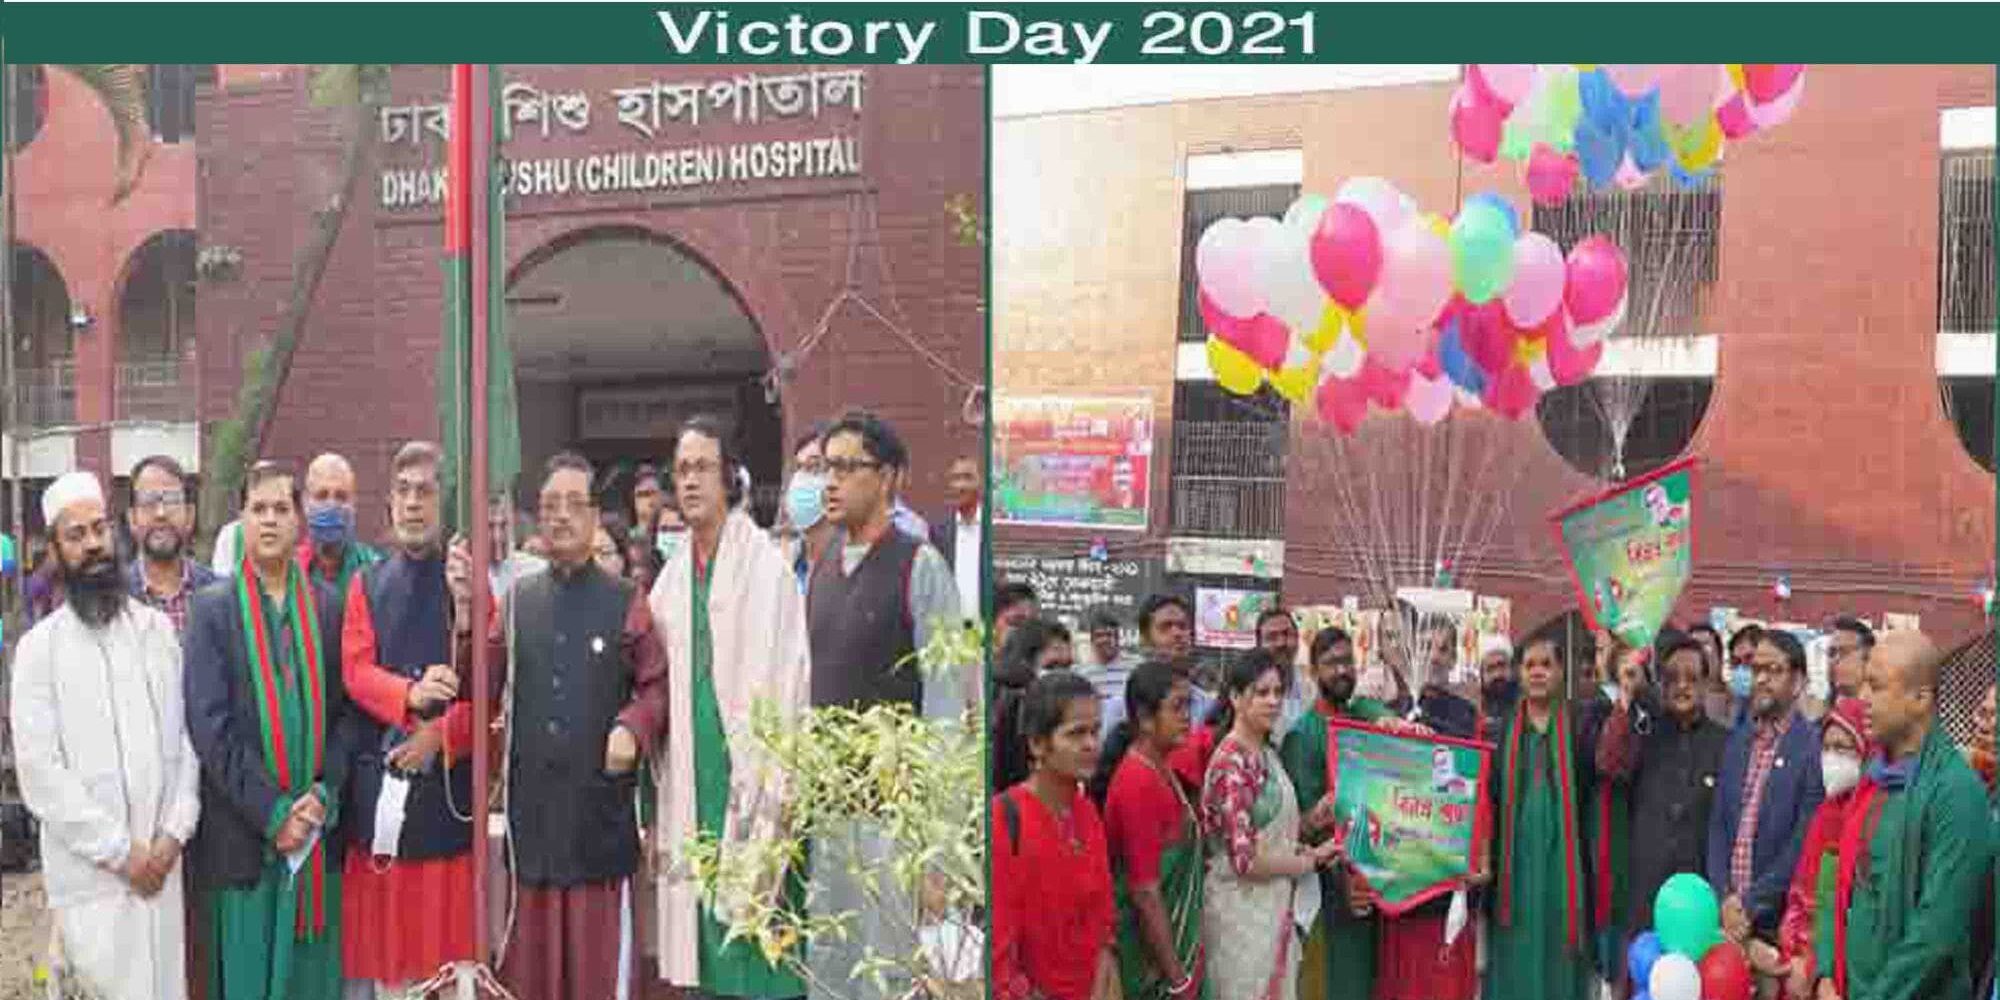 Victory-Day-2021-6-1